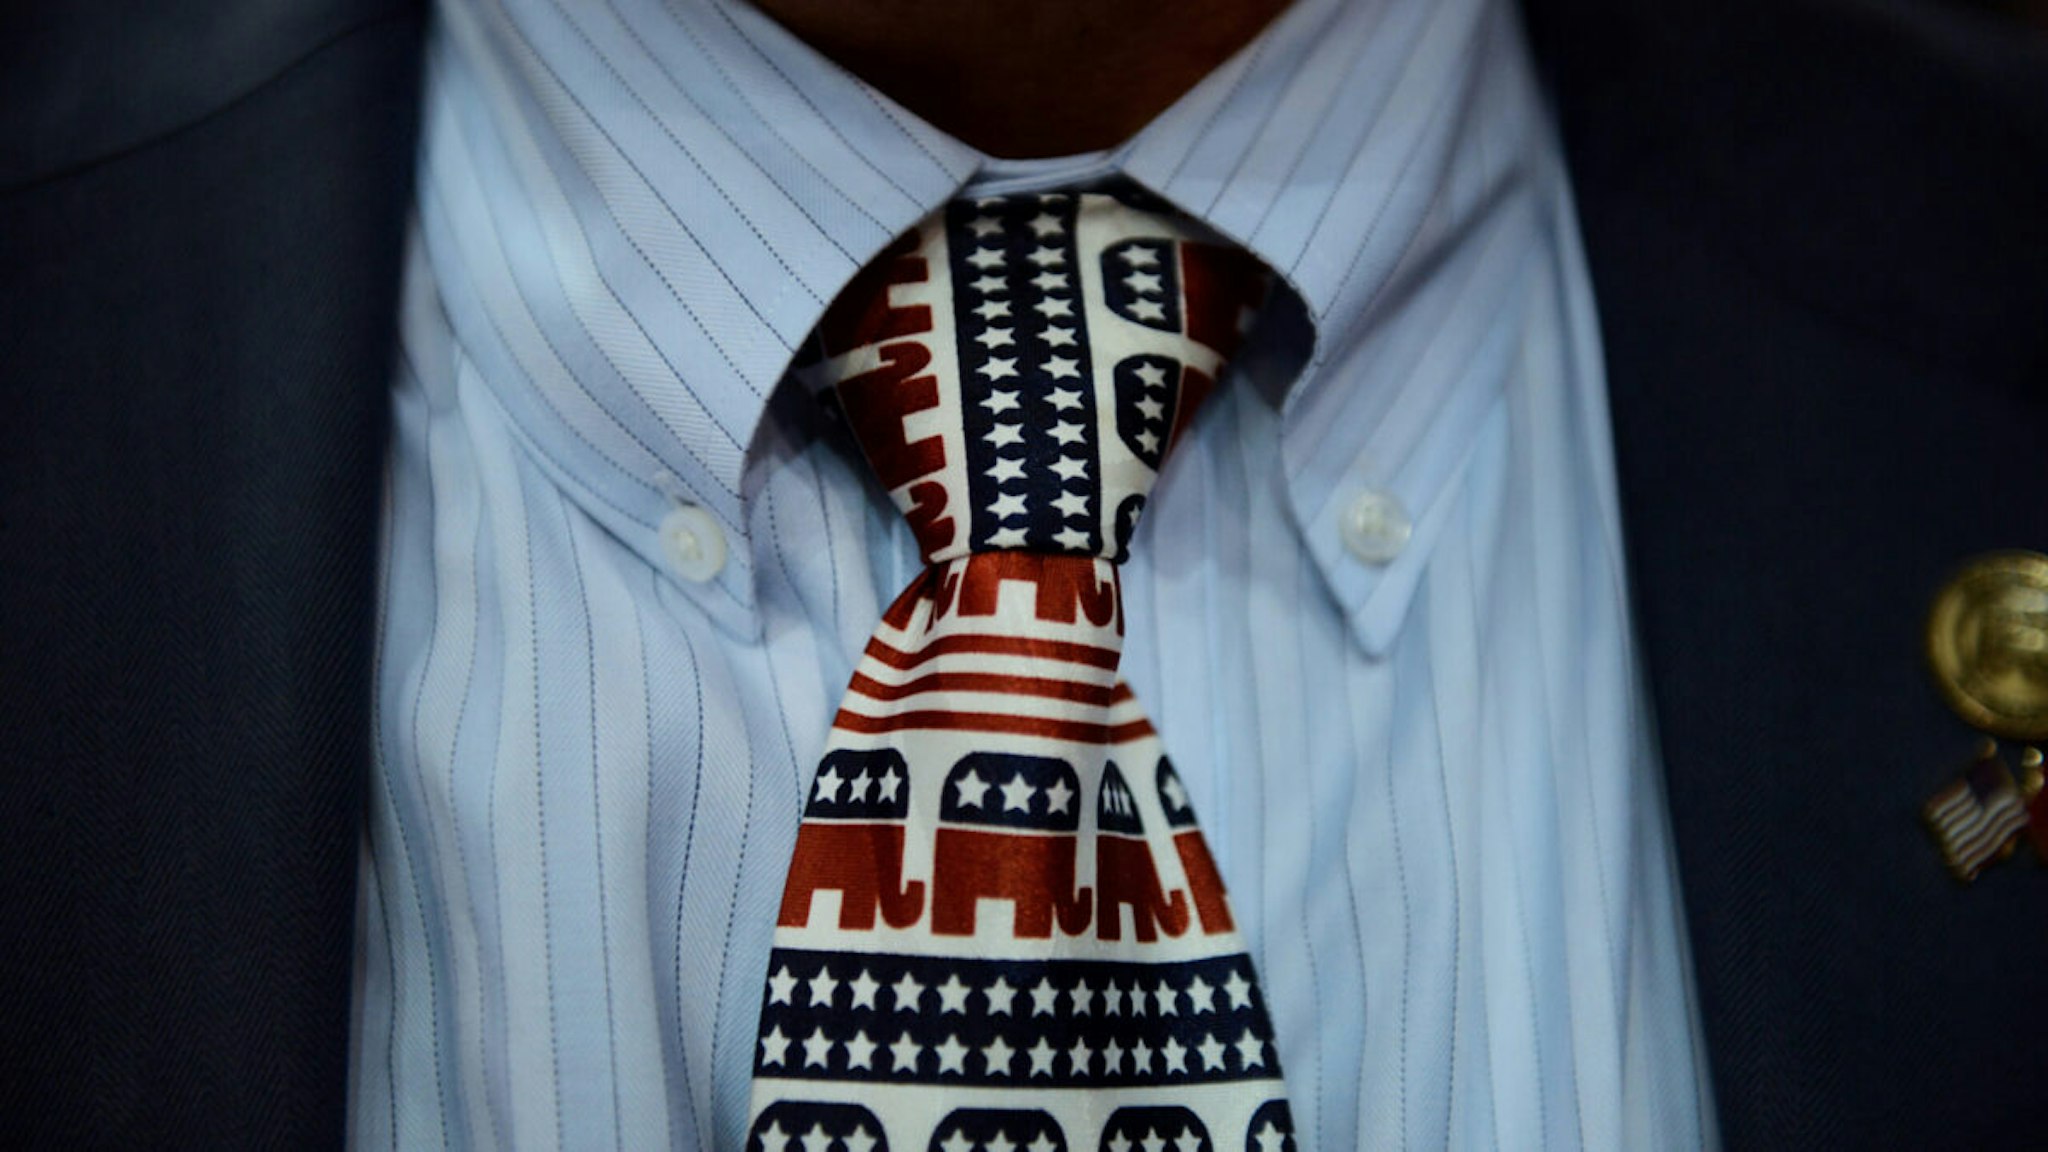 Will Deschamps, state chairman of Montana, wears a tie decorated with elephant mascots at the Republican National Convention (RNC) in Tampa, Florida, U.S., on Thursday, Aug. 30, 2012.